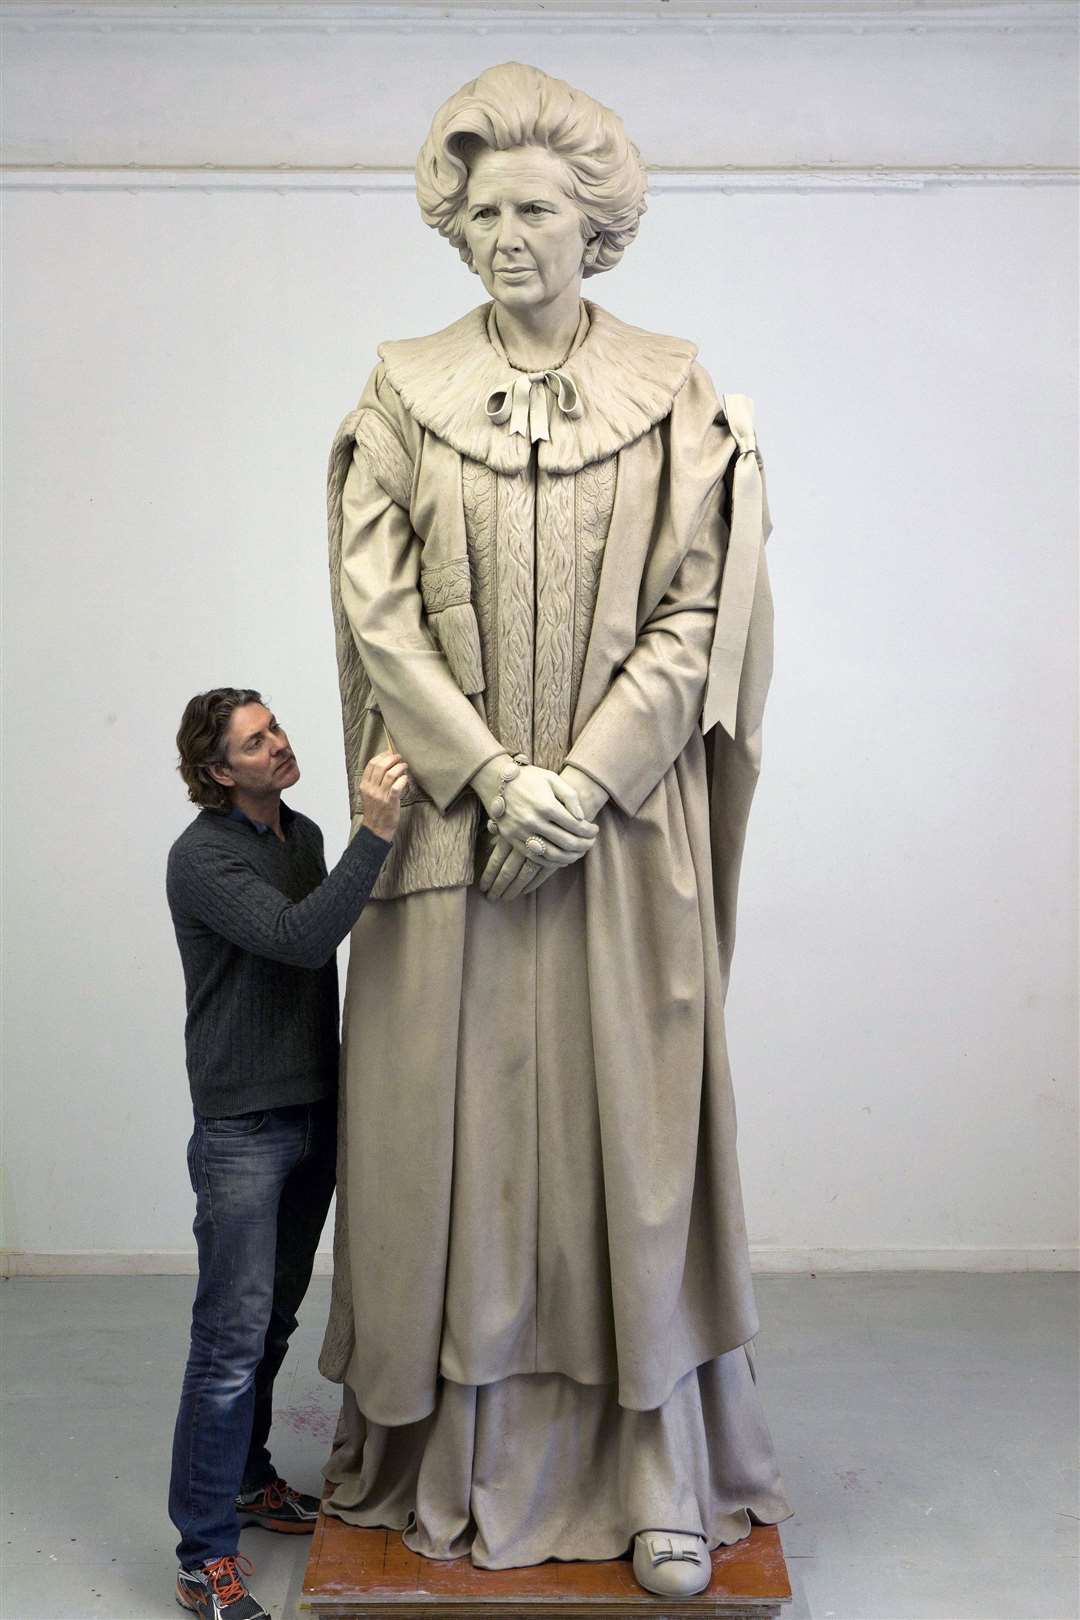 The statue is set to be erected in her home town of Grantham, Lincolnshire (Douglas Jennings/PA)